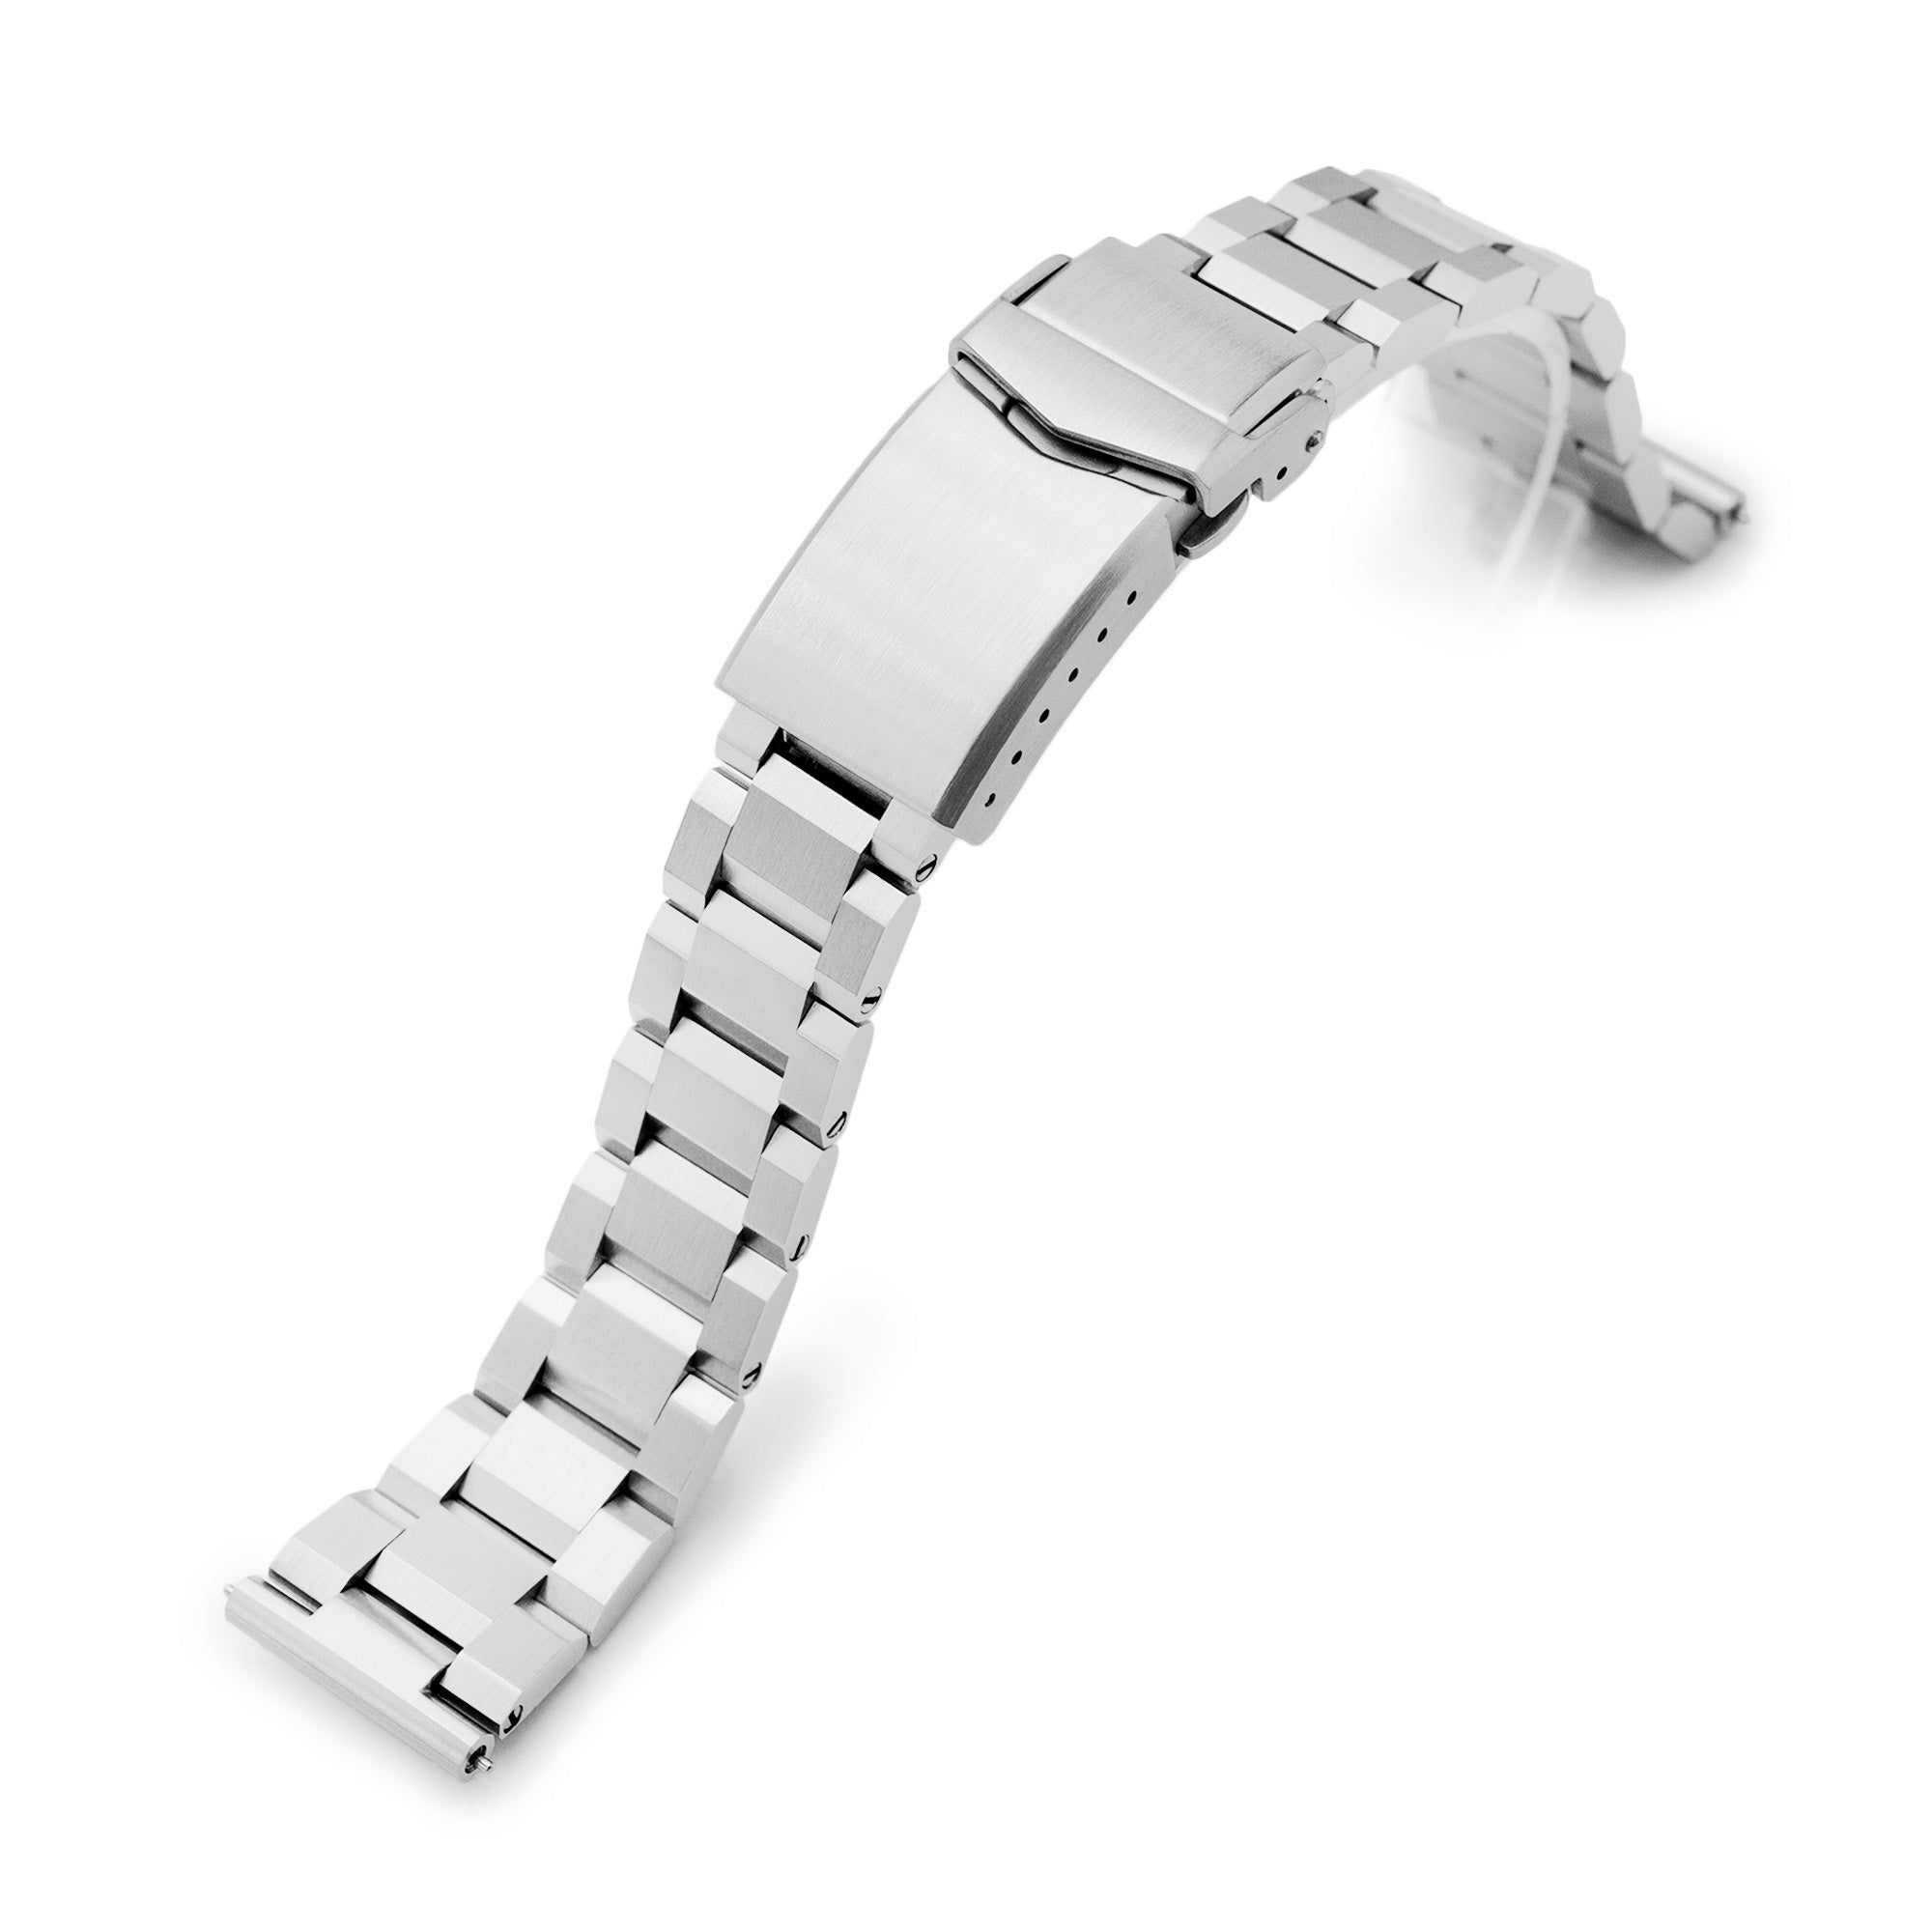 19mm Hexad III Watch Band Straight End, 316L Stainless Steel Brushed V-Clasp Strapcode Watch Bands